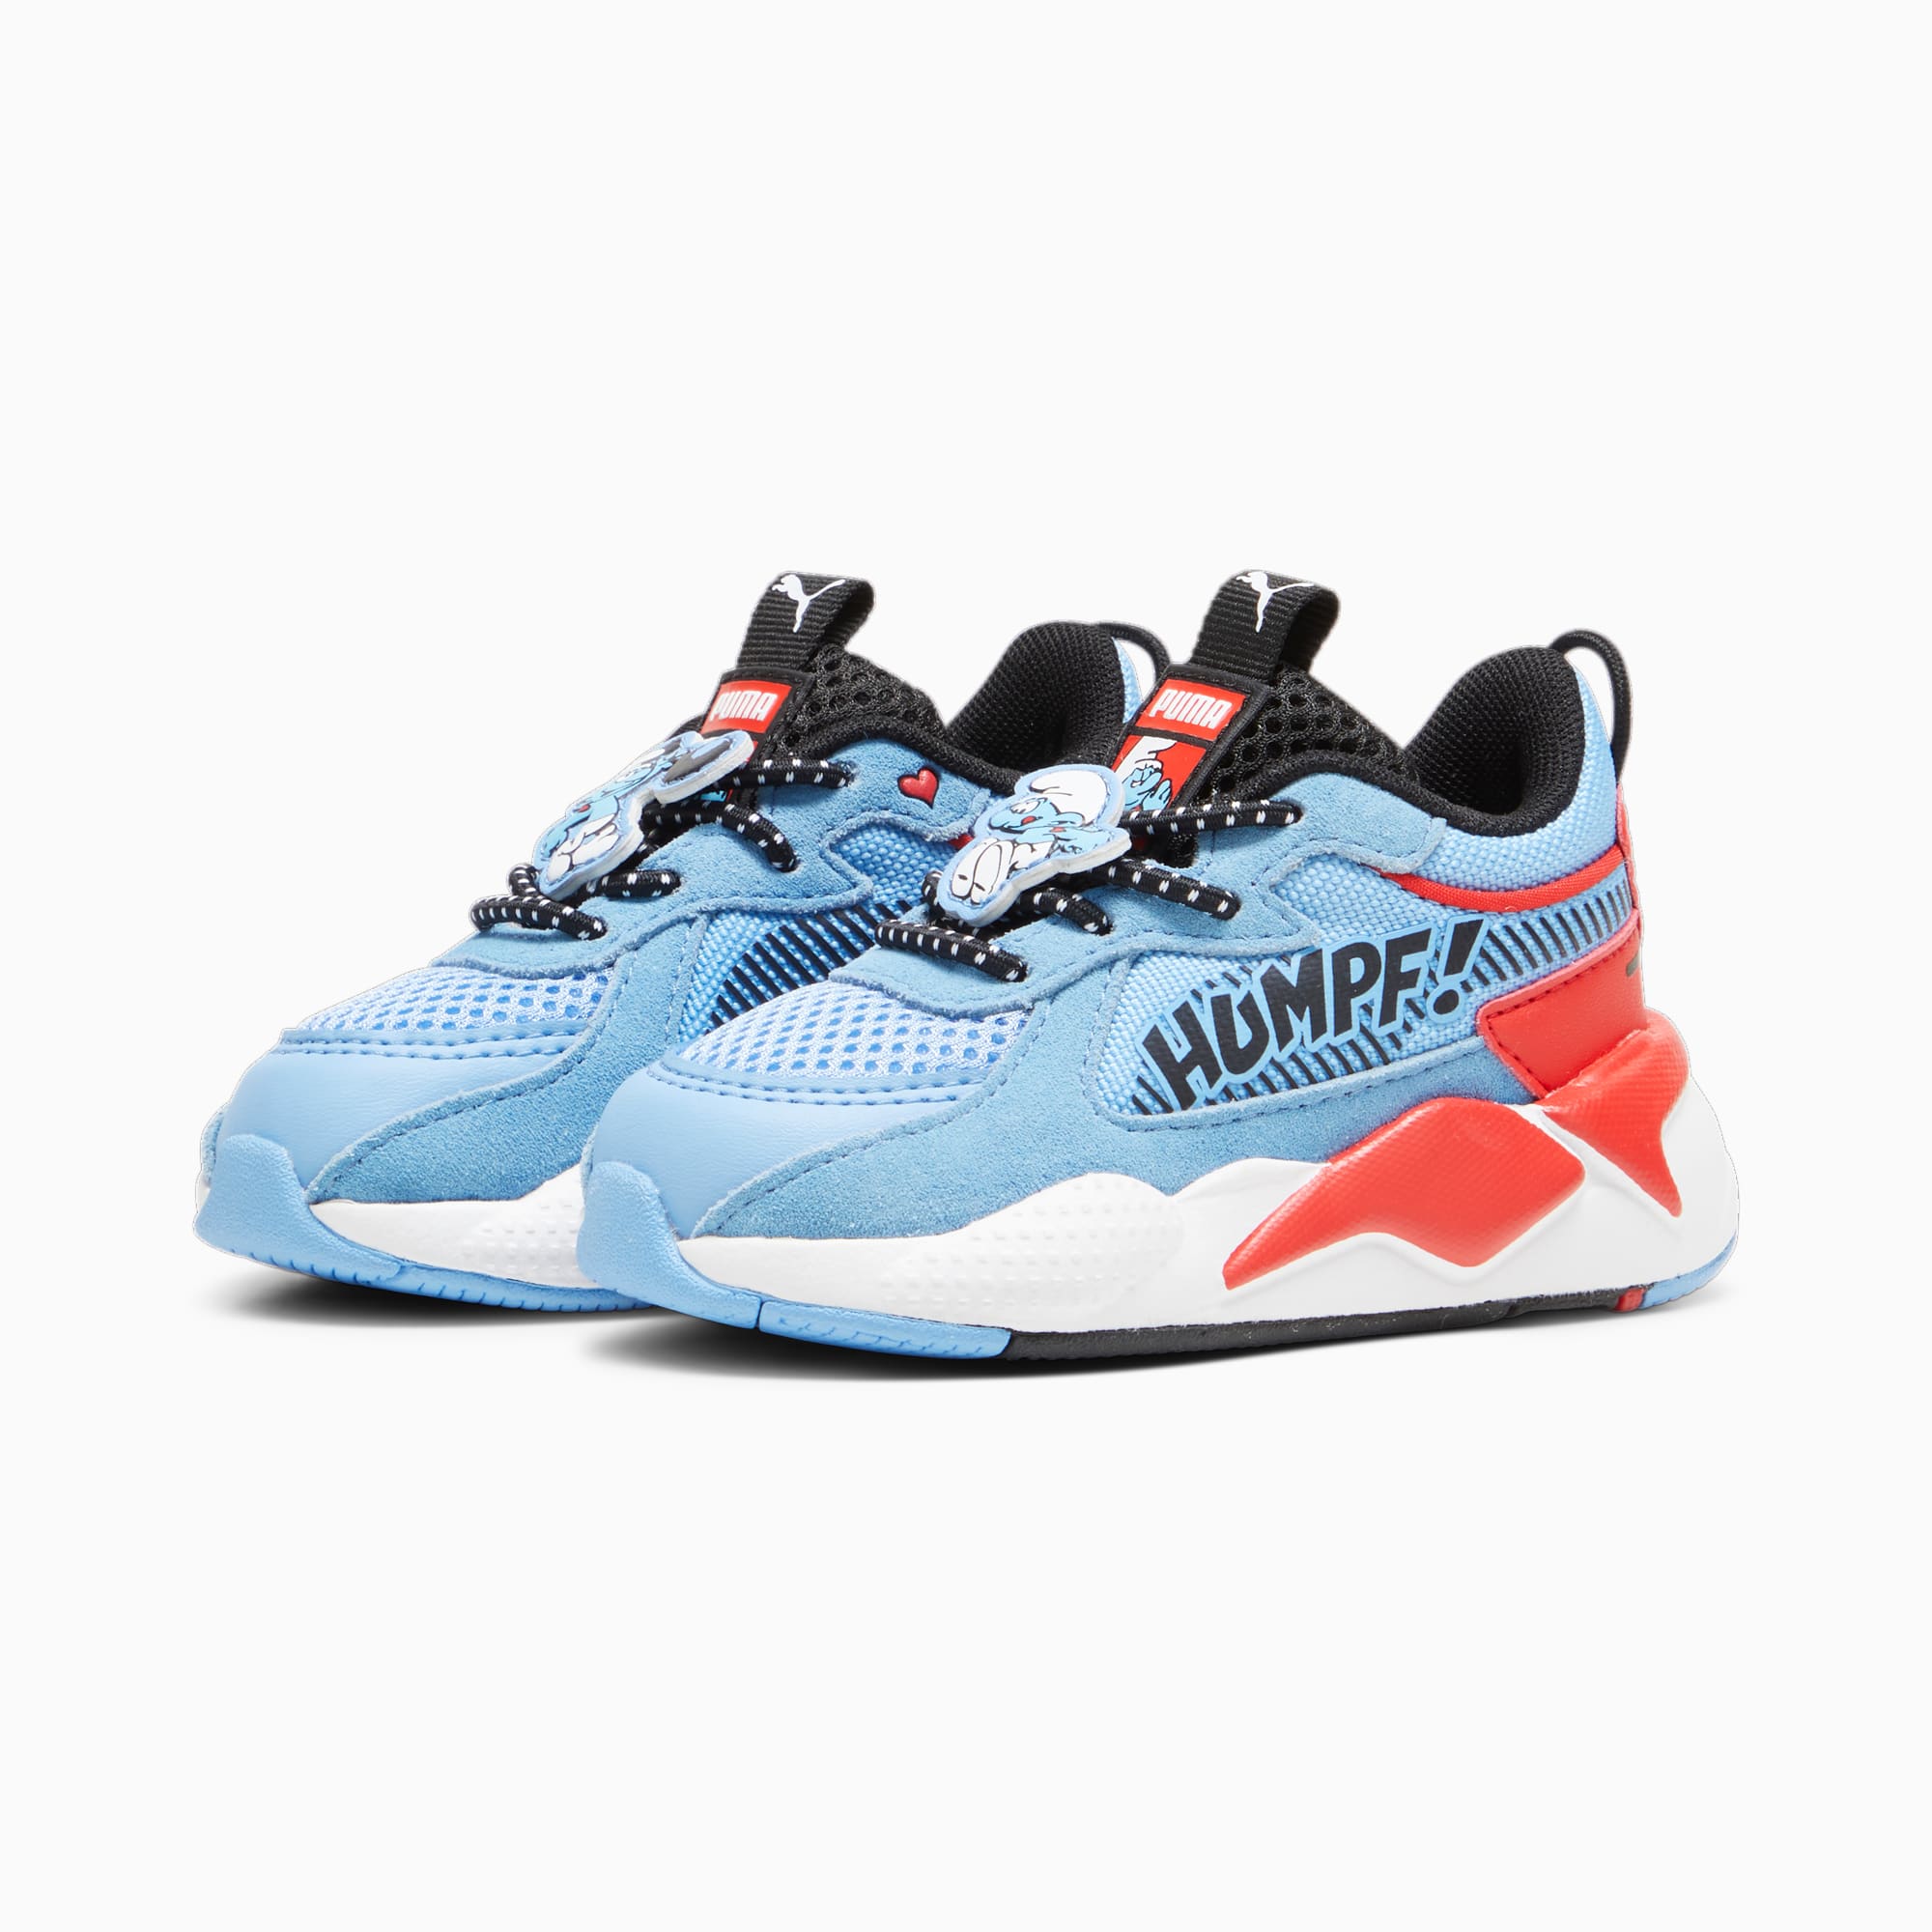 PUMA X The Smurfs Rs-x Toddlers' Sneakers, Light Blue/Red, Size 19, Shoes